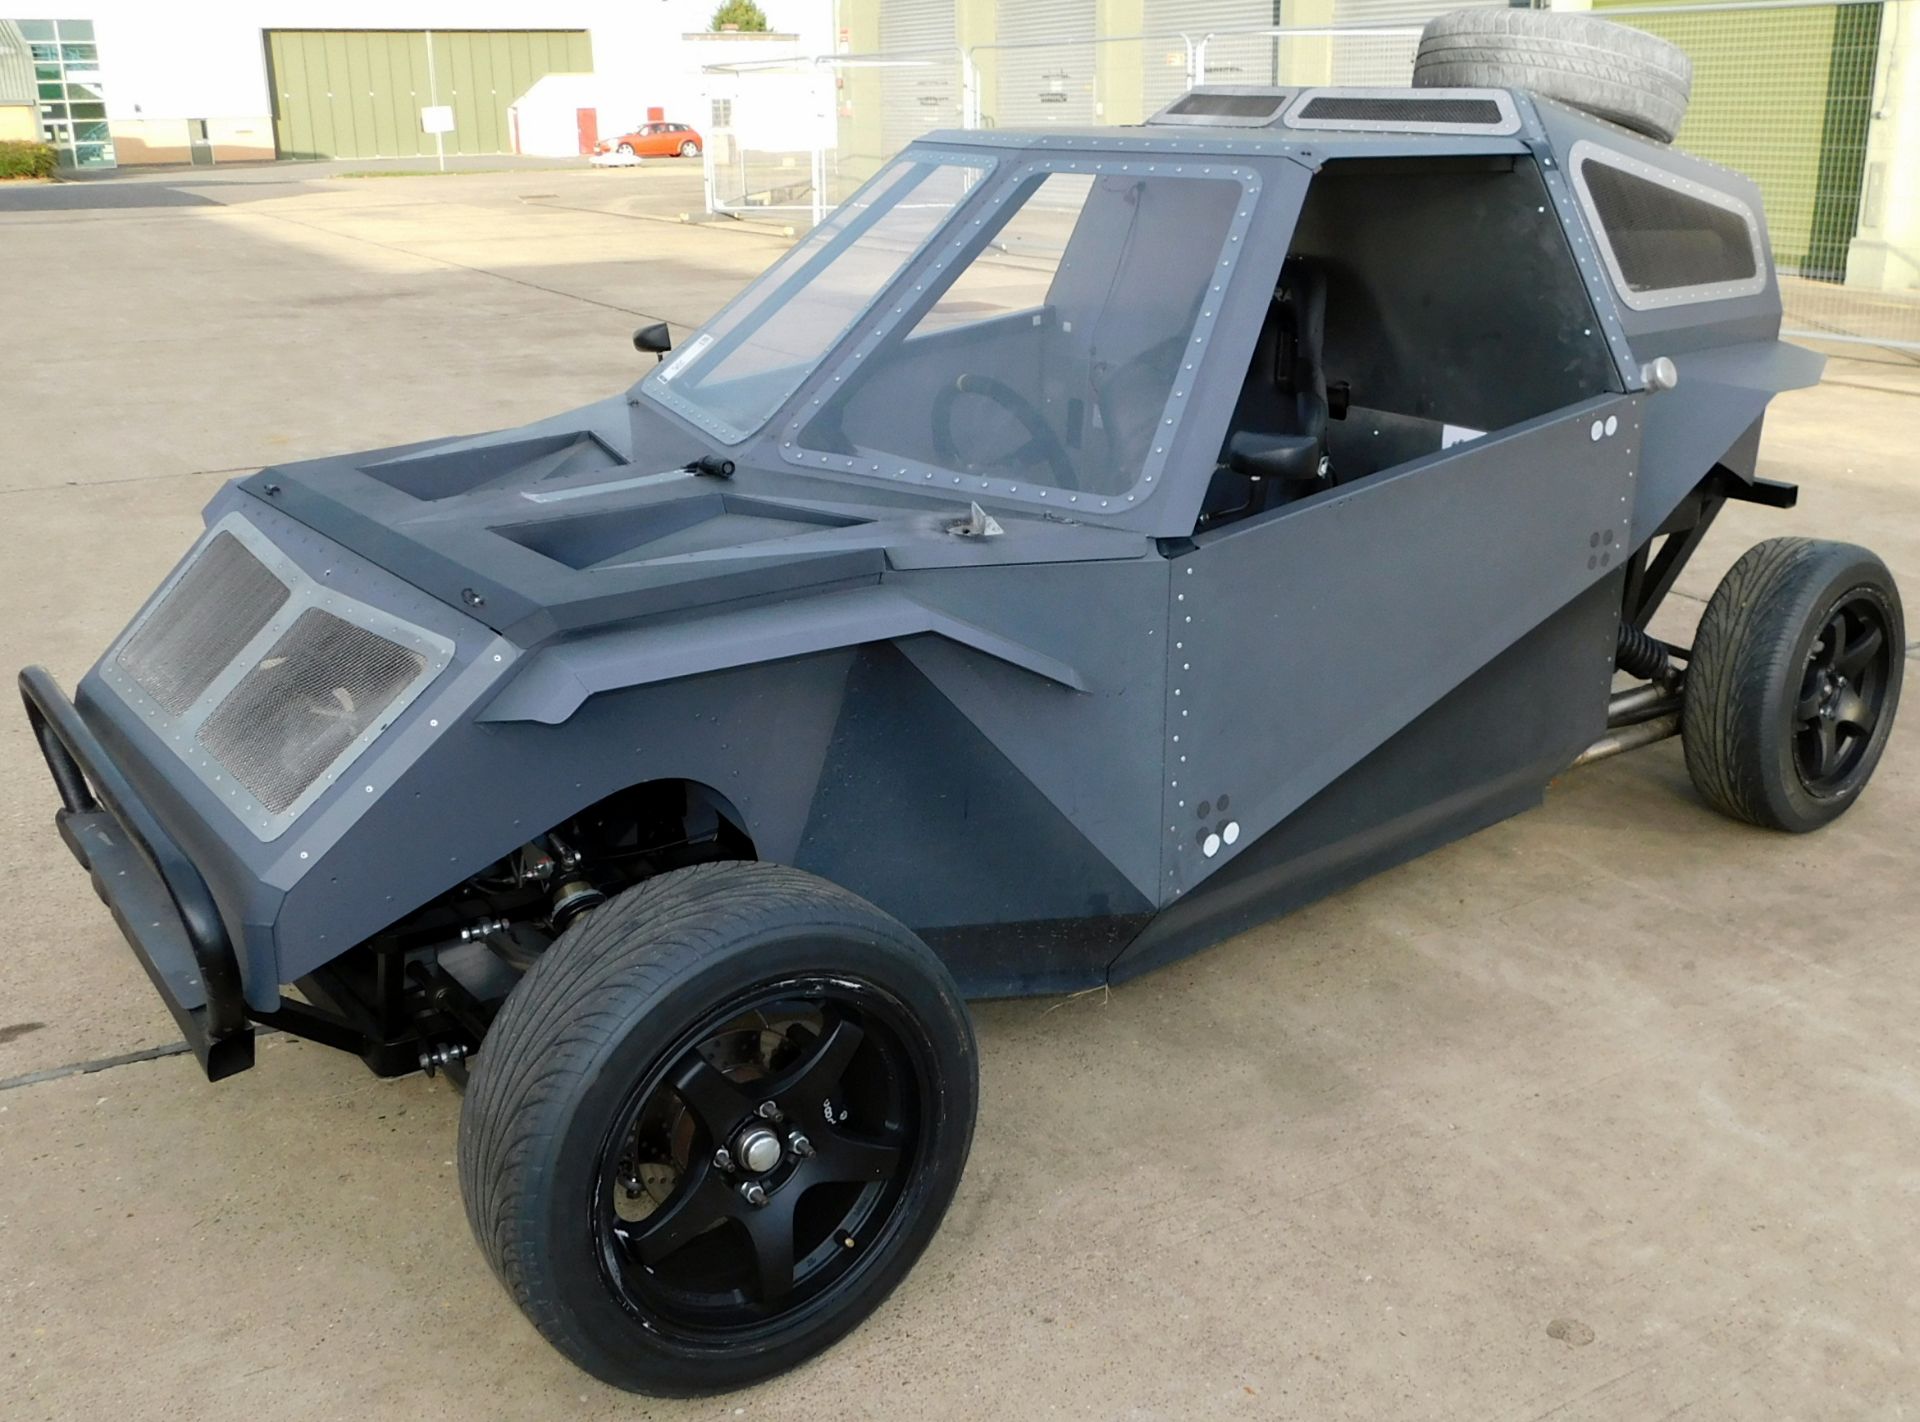 Bespoke Off-Road Buggy, Rear Wheel Drive, Chassis Number FL0001 , Suzuki Hyabusa 1300cc 4 Cylinder - Image 2 of 7